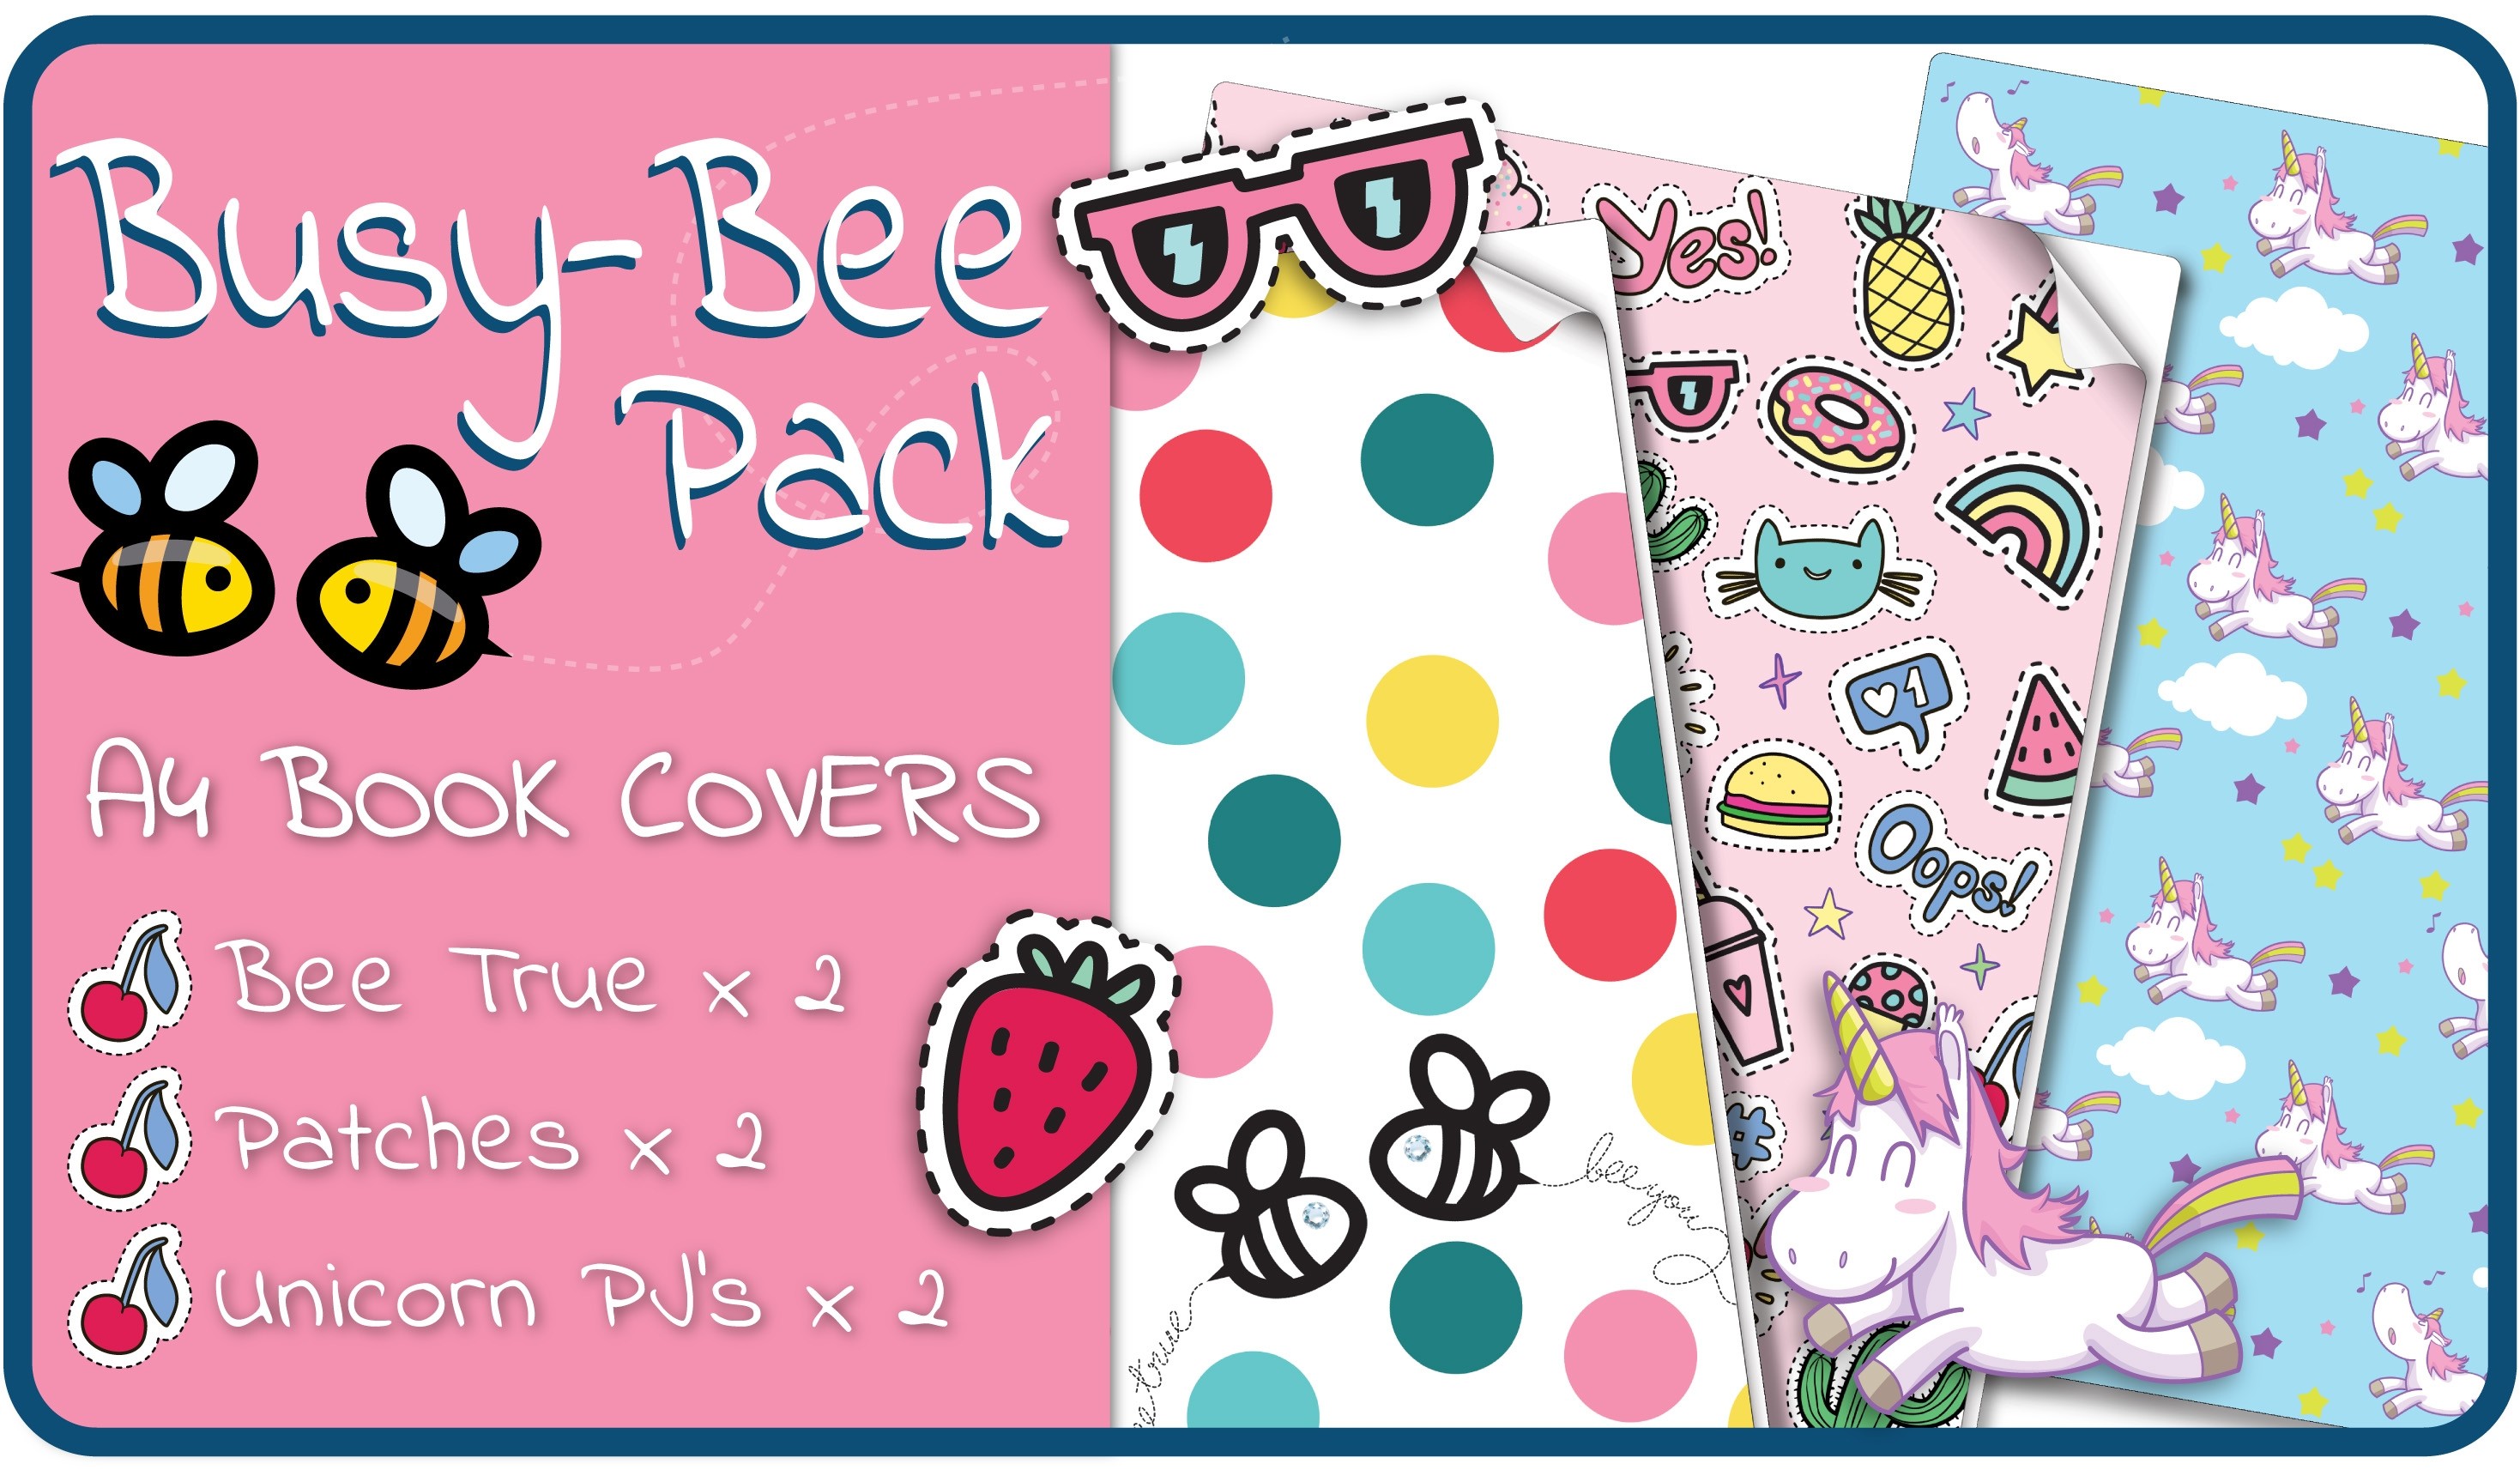 Busy-Bee A4 School Book Covers - 6 pack Slip-On PVC Jackets